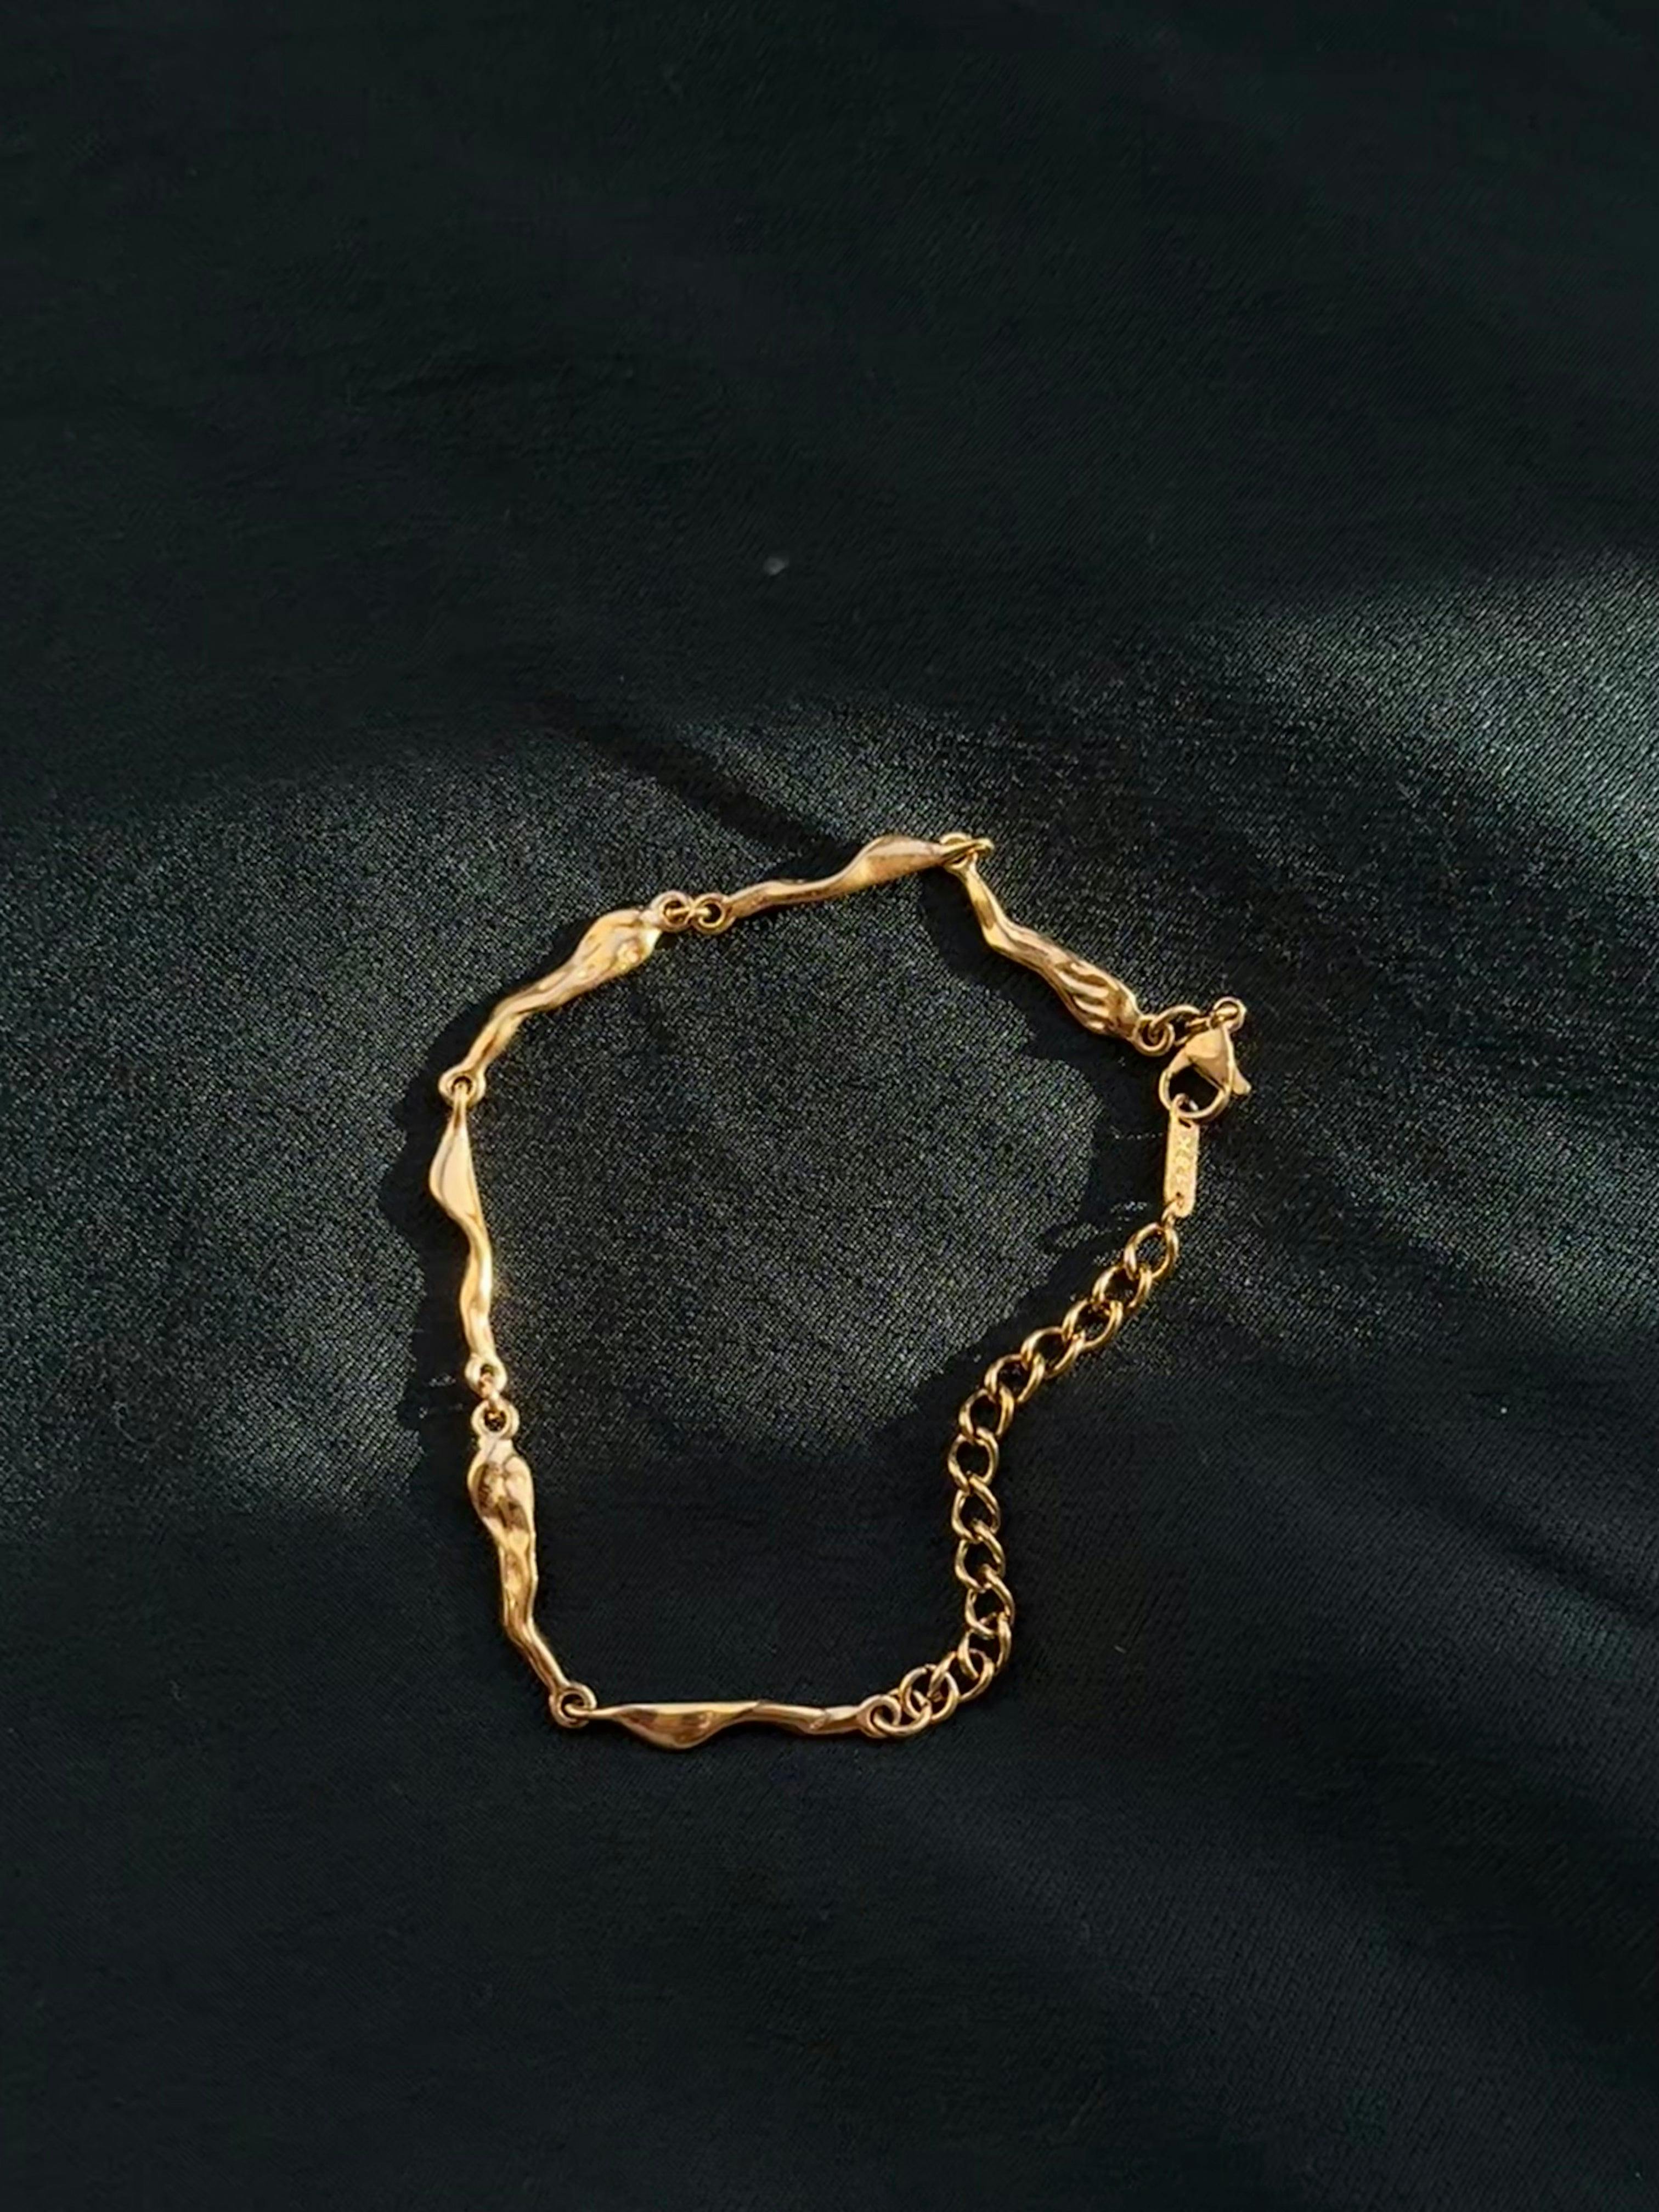 Ume Irregular Organice Gold Chain Bracelet, a product by By Majime 